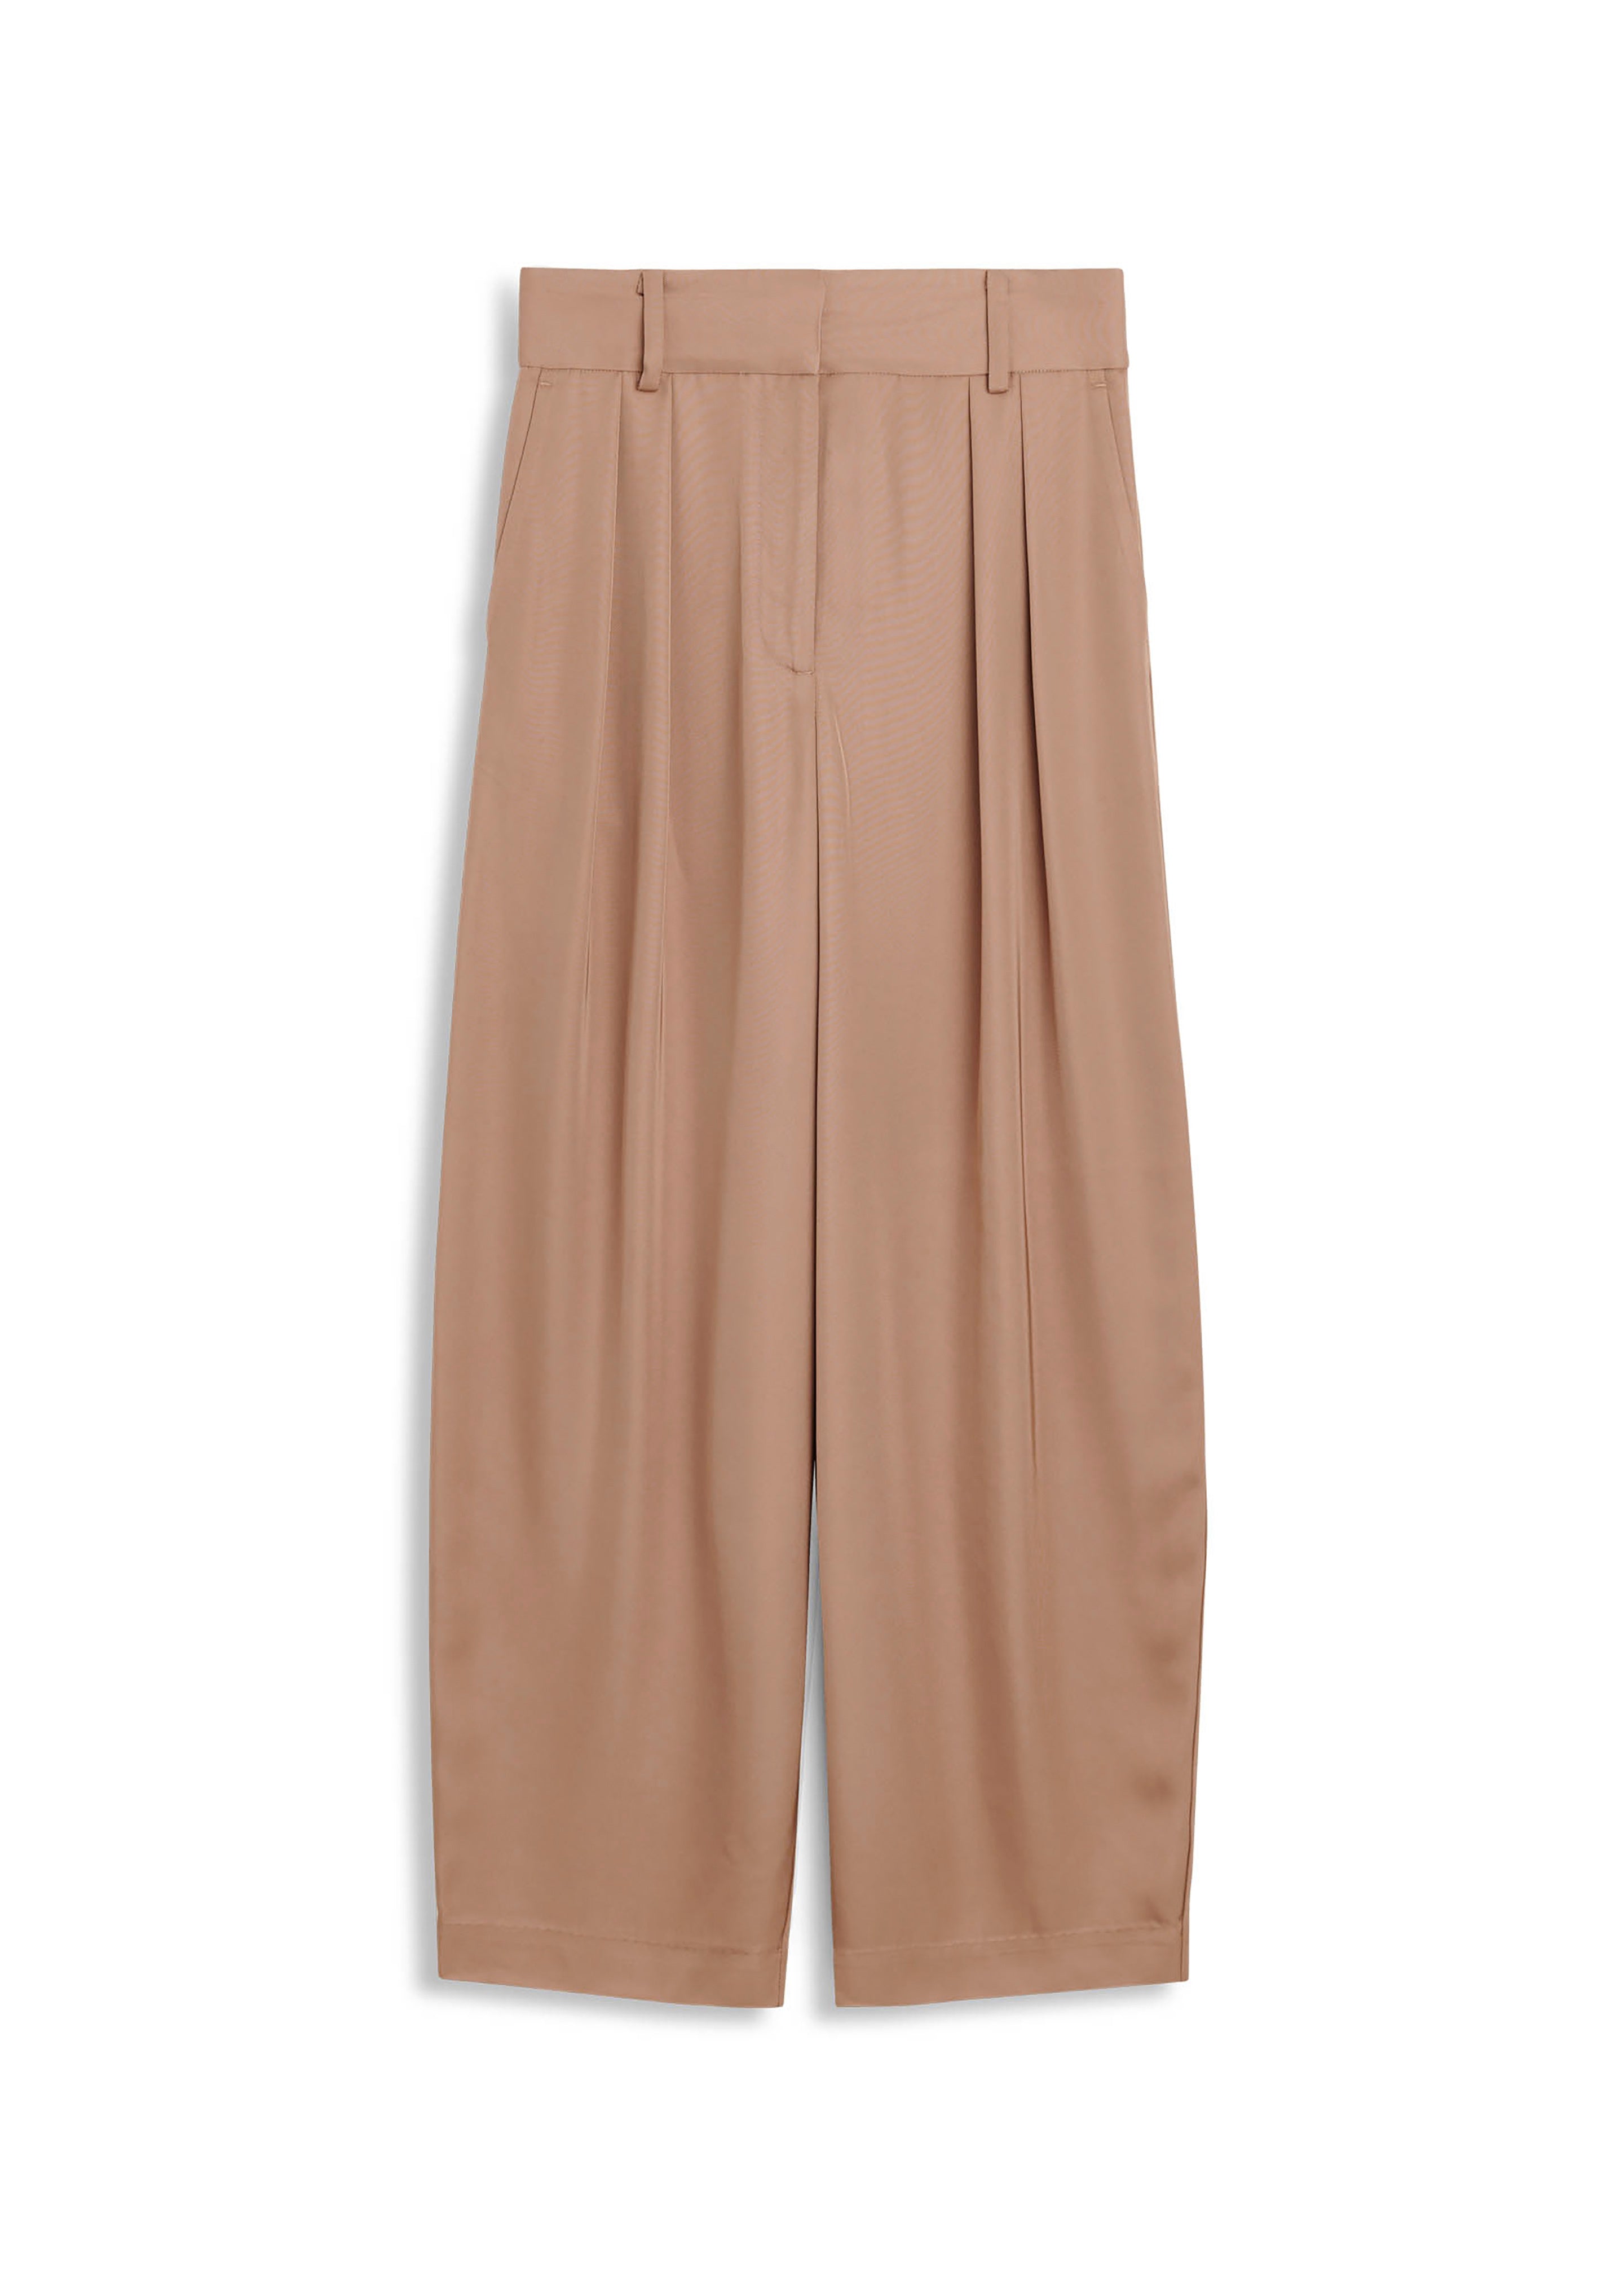 By Malene Birger Piscali Mid-Rise Pants - Tobacco Brown - 9